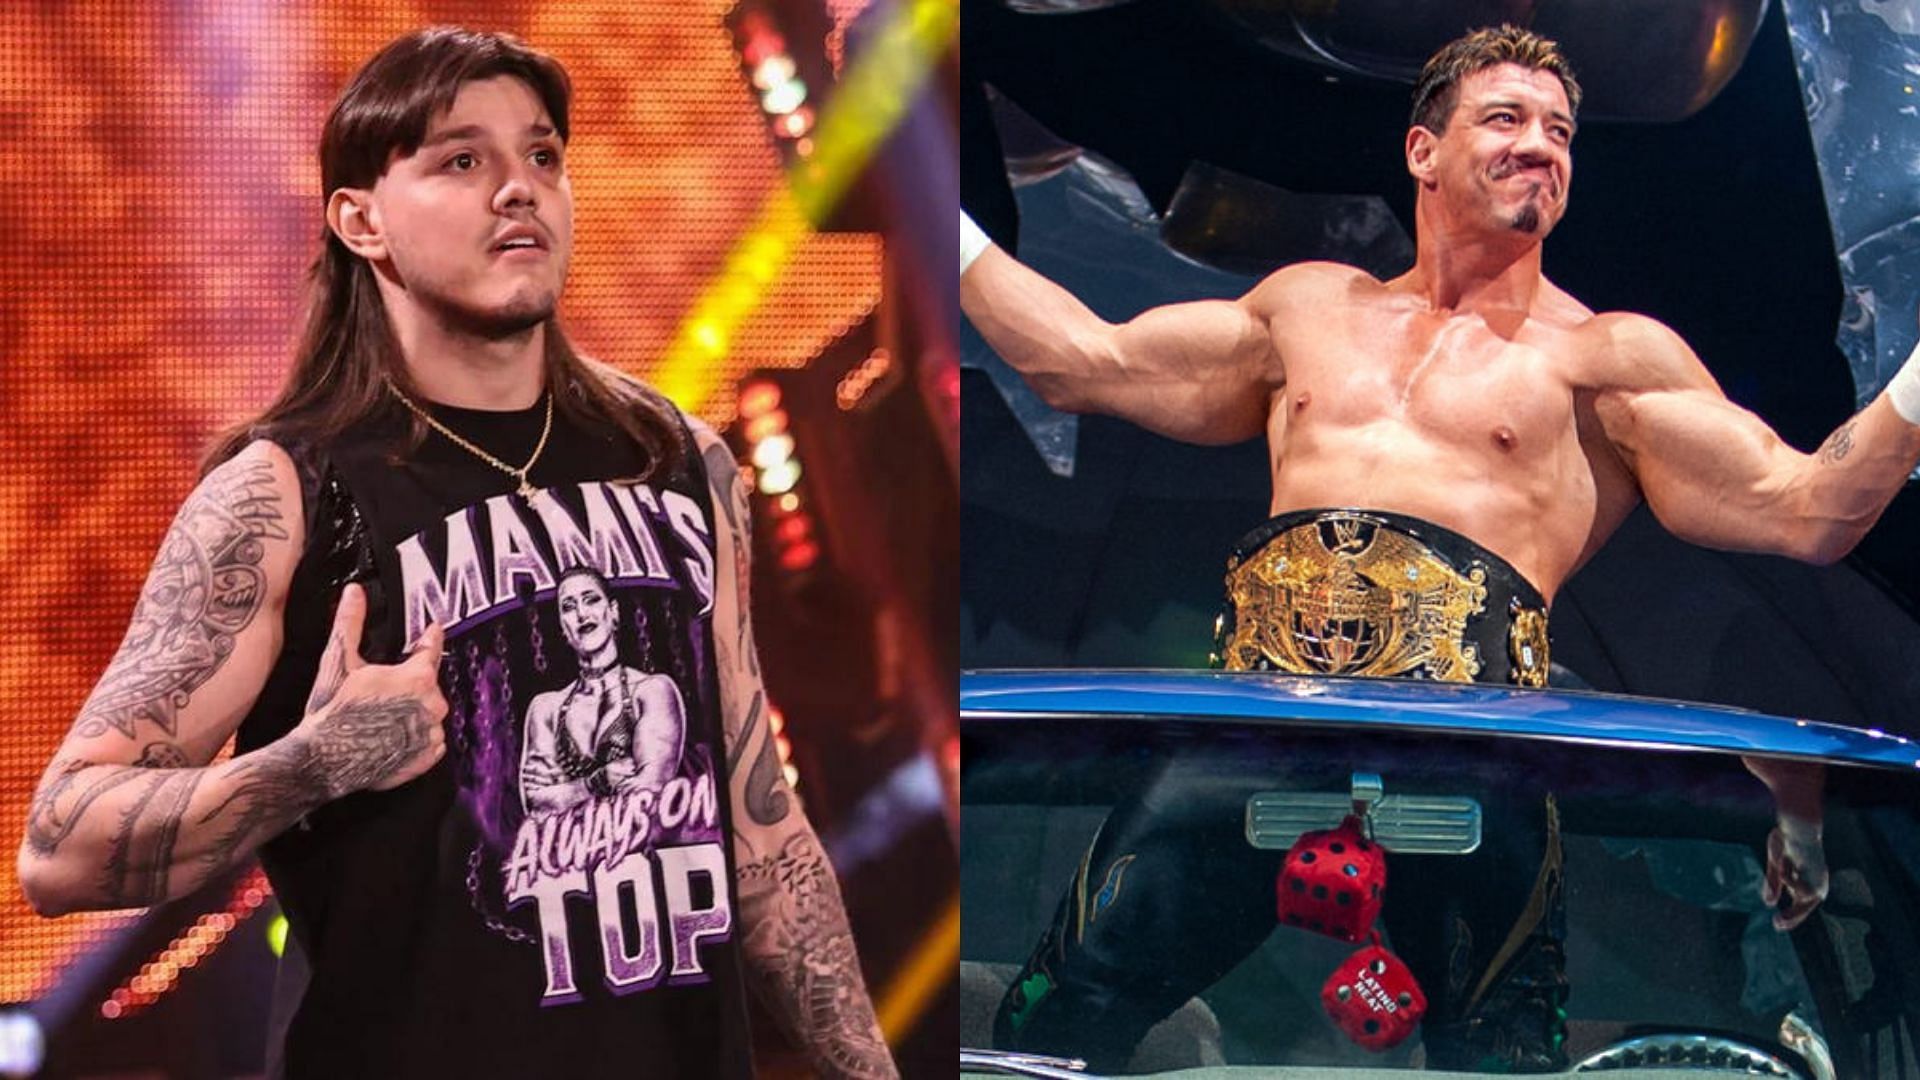 Dominik Mysterio was involved in a storyline with Eddie Guerrero